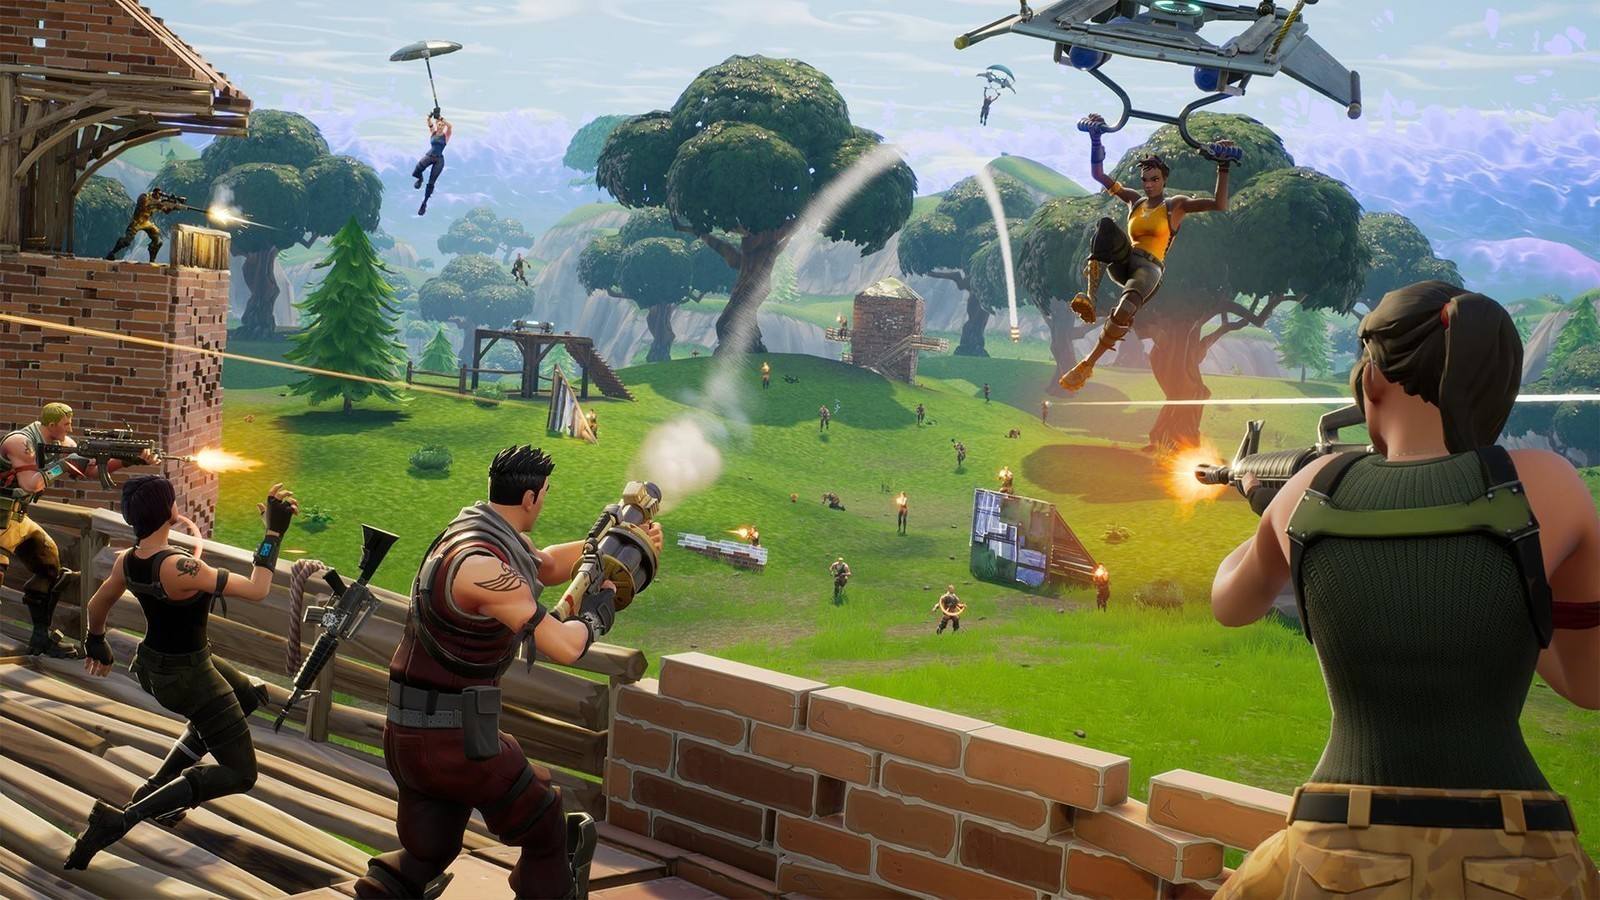 Fortnite': The Definitive History of Battle Royale Video Games